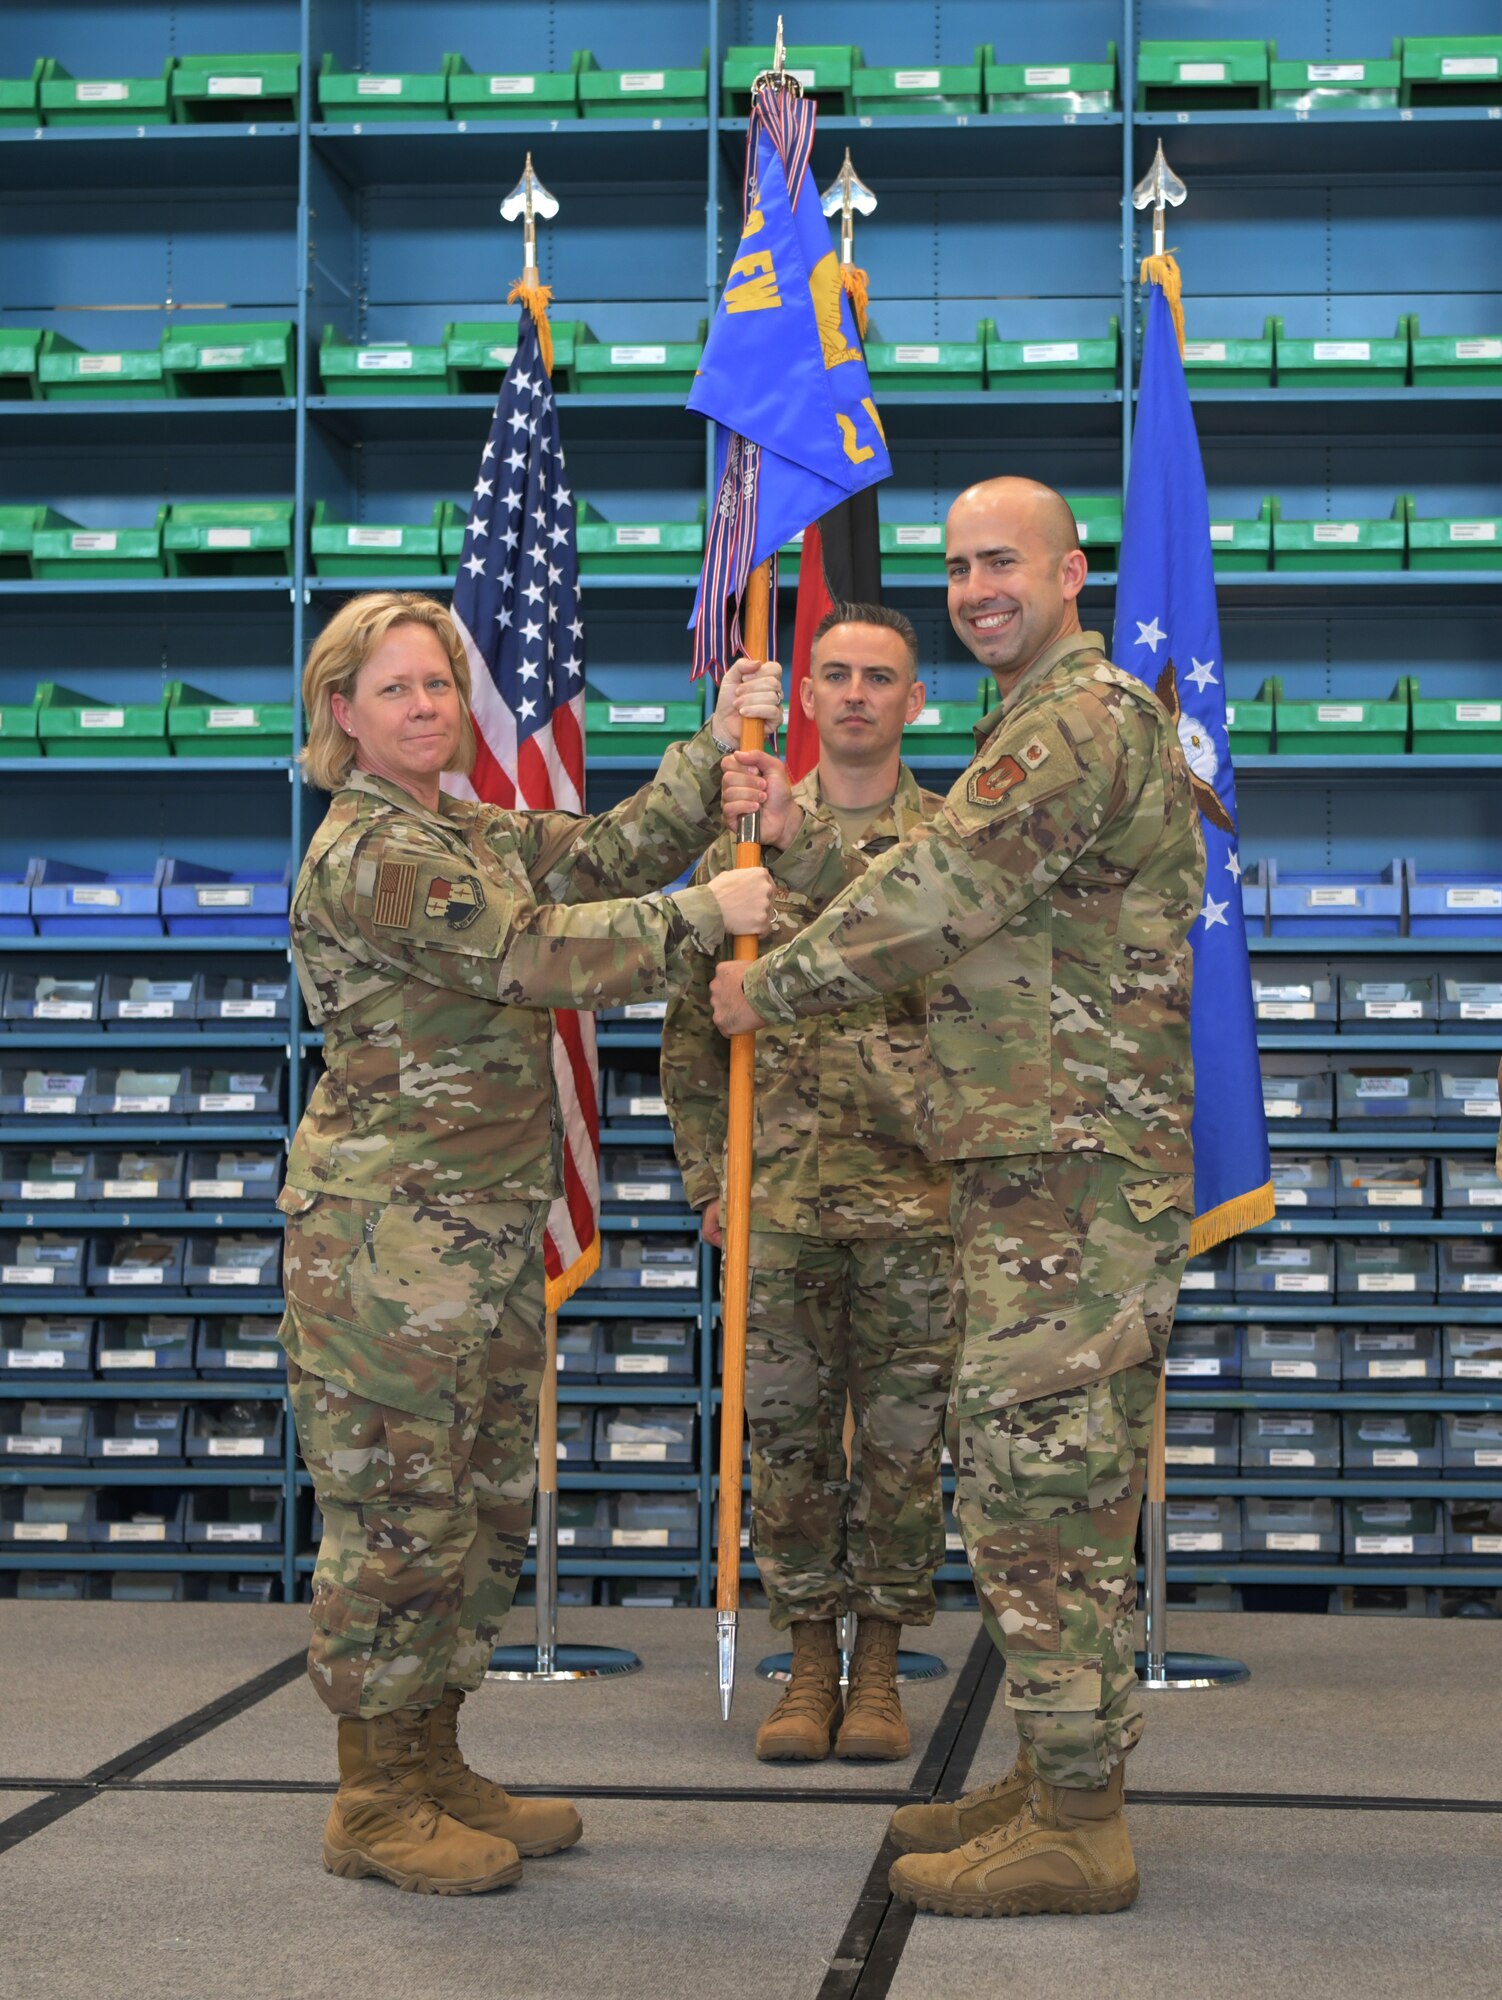 U.S. Air Force Col. Marlyce Roth, 52nd Mission Support Group commander, left, passes the ceremonial guidon to Maj. Juan Fiol, incoming 52nd Logistics Readiness Squadron commander, right, during the 52nd LRS change of command ceremony at Spangdahlem Air Base, Germany, June 24, 2019. (U.S. Air Force photo by Airman 1st Class Jovante Johnson)